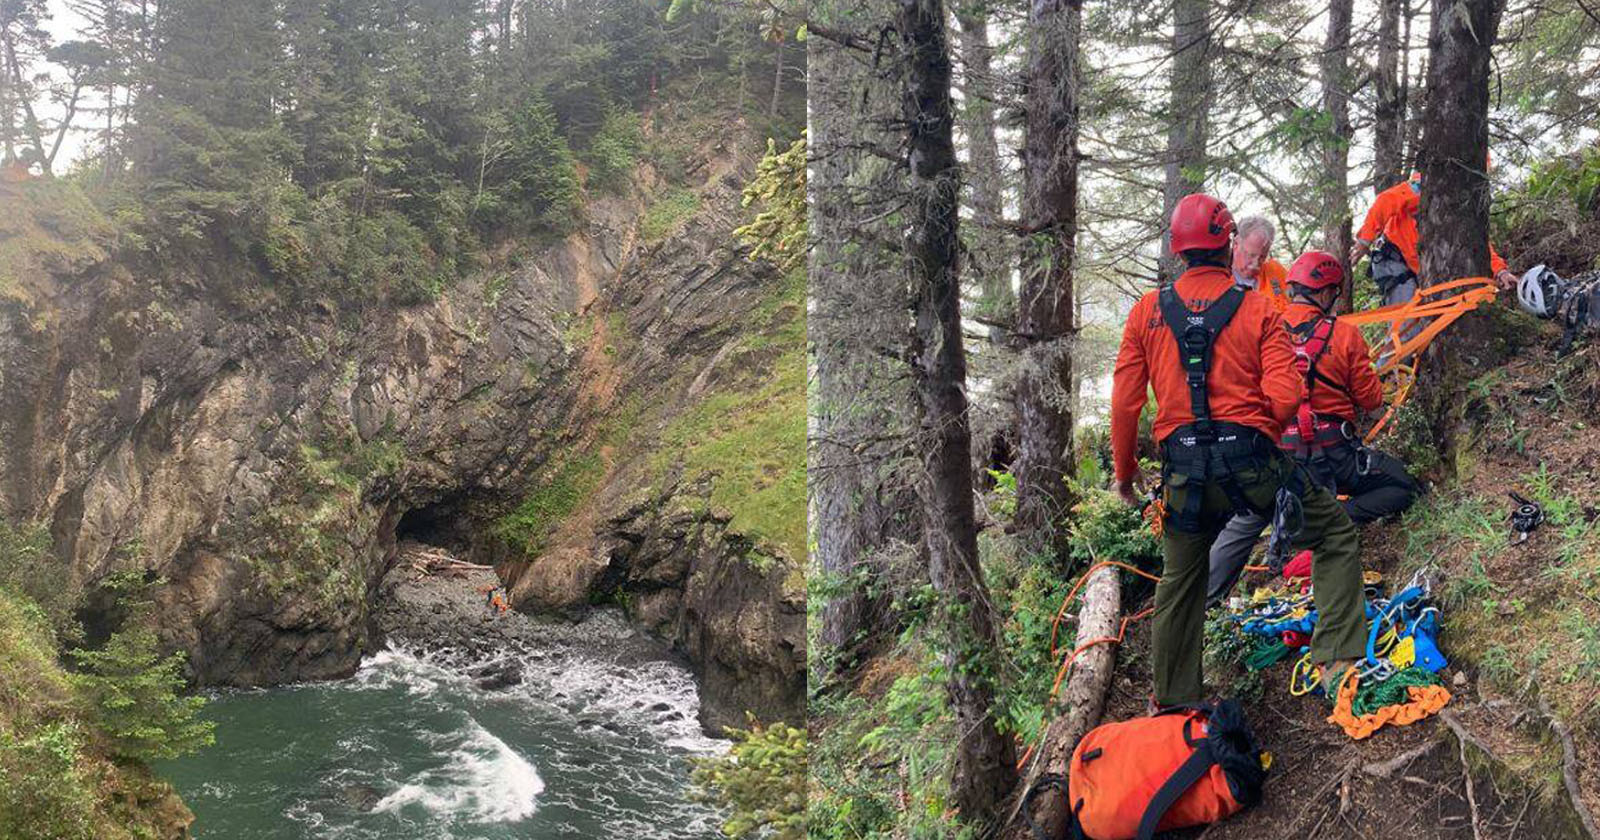 Landscape Photographer Dies Slipping From 300-Foot Cliff in Oregon